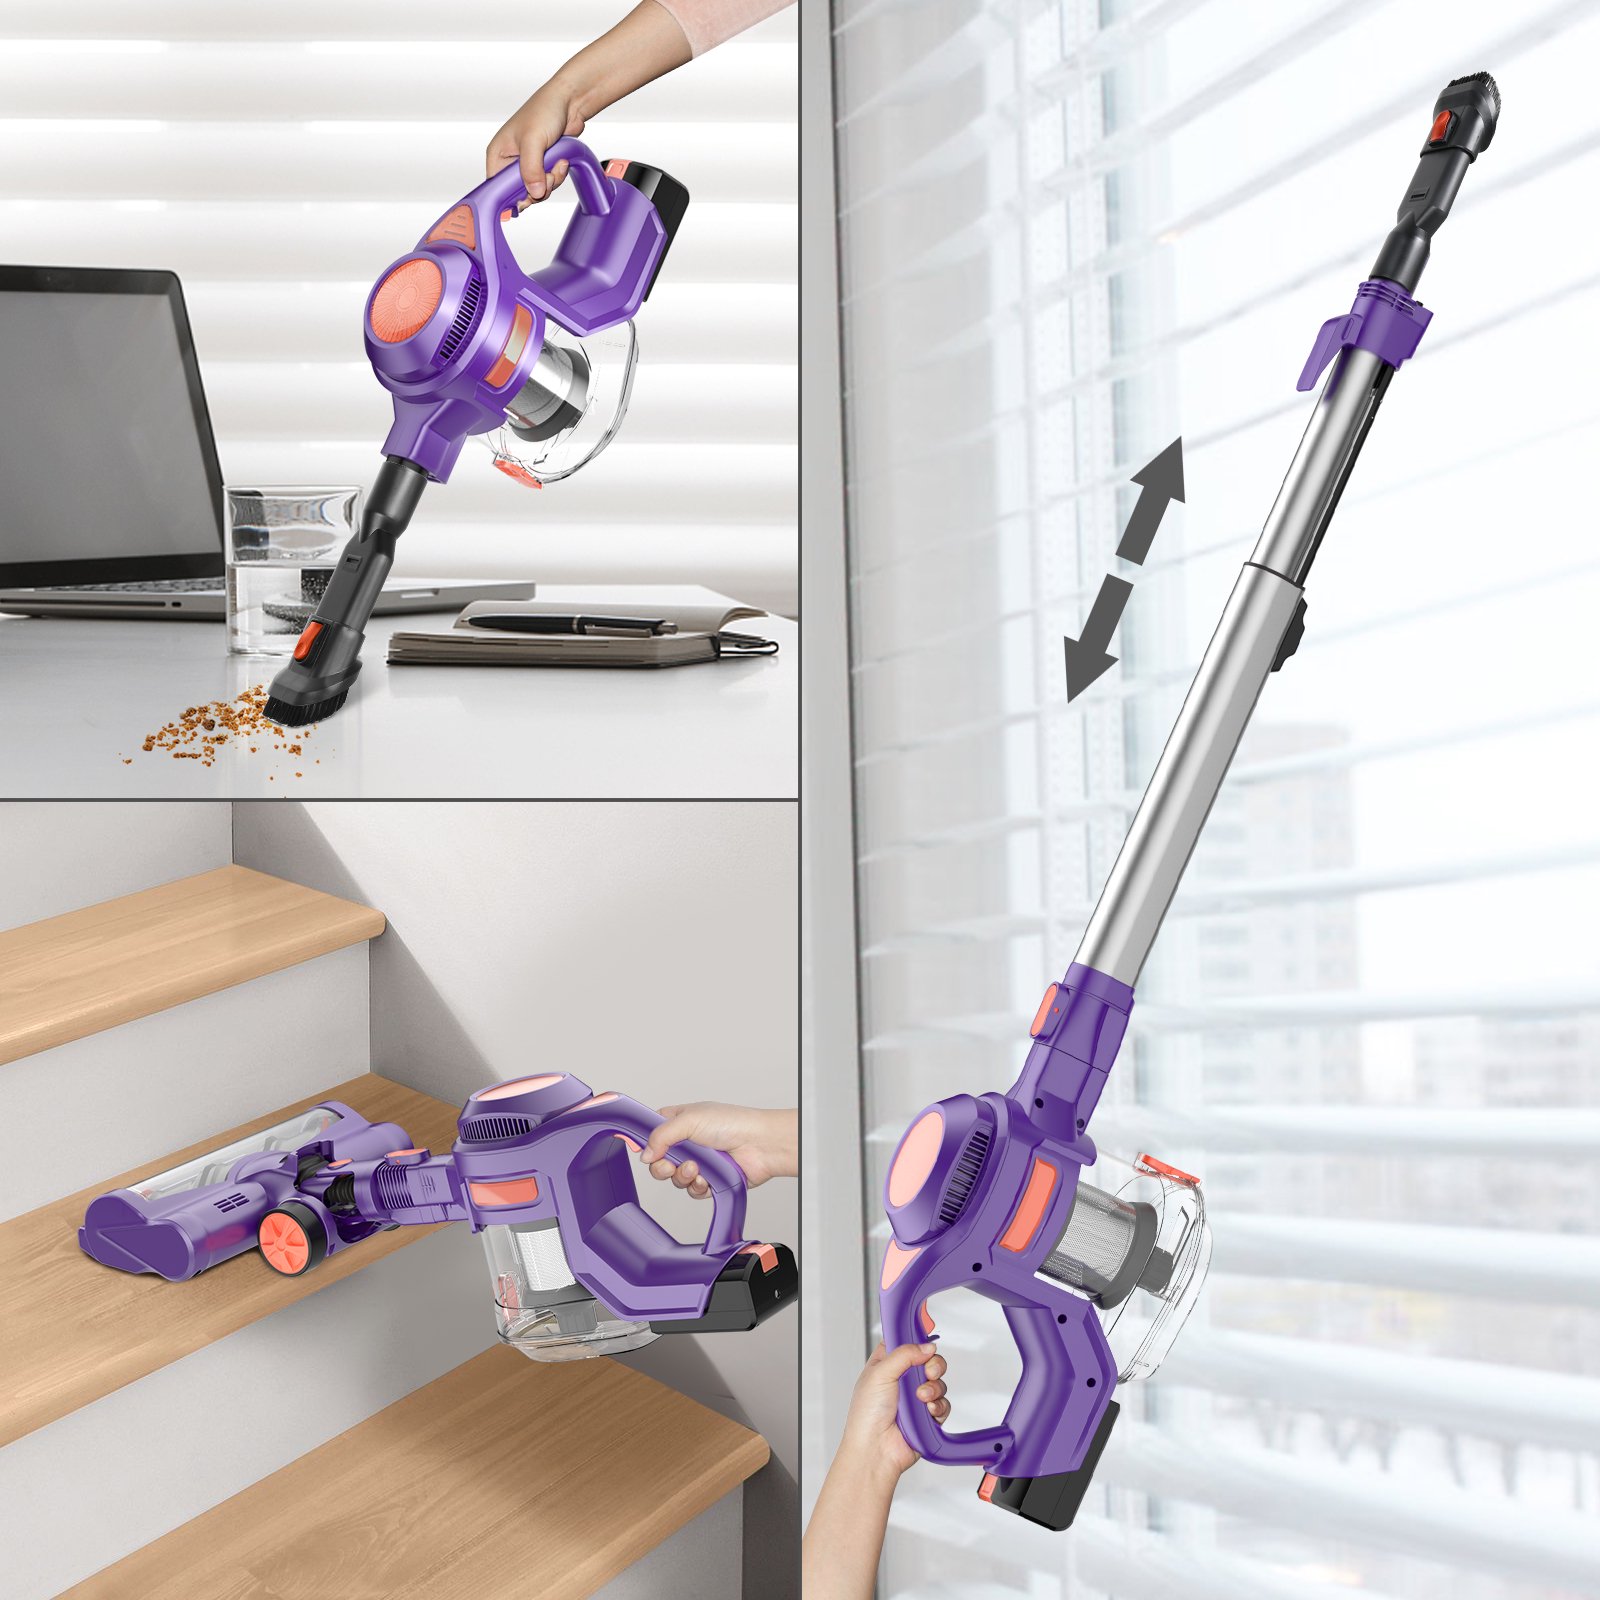 MOOSOO Cordless Vacuum Strong Suction Quiet Lightweight 4 in 1 Stick Vacuum Cleaner - image 4 of 8